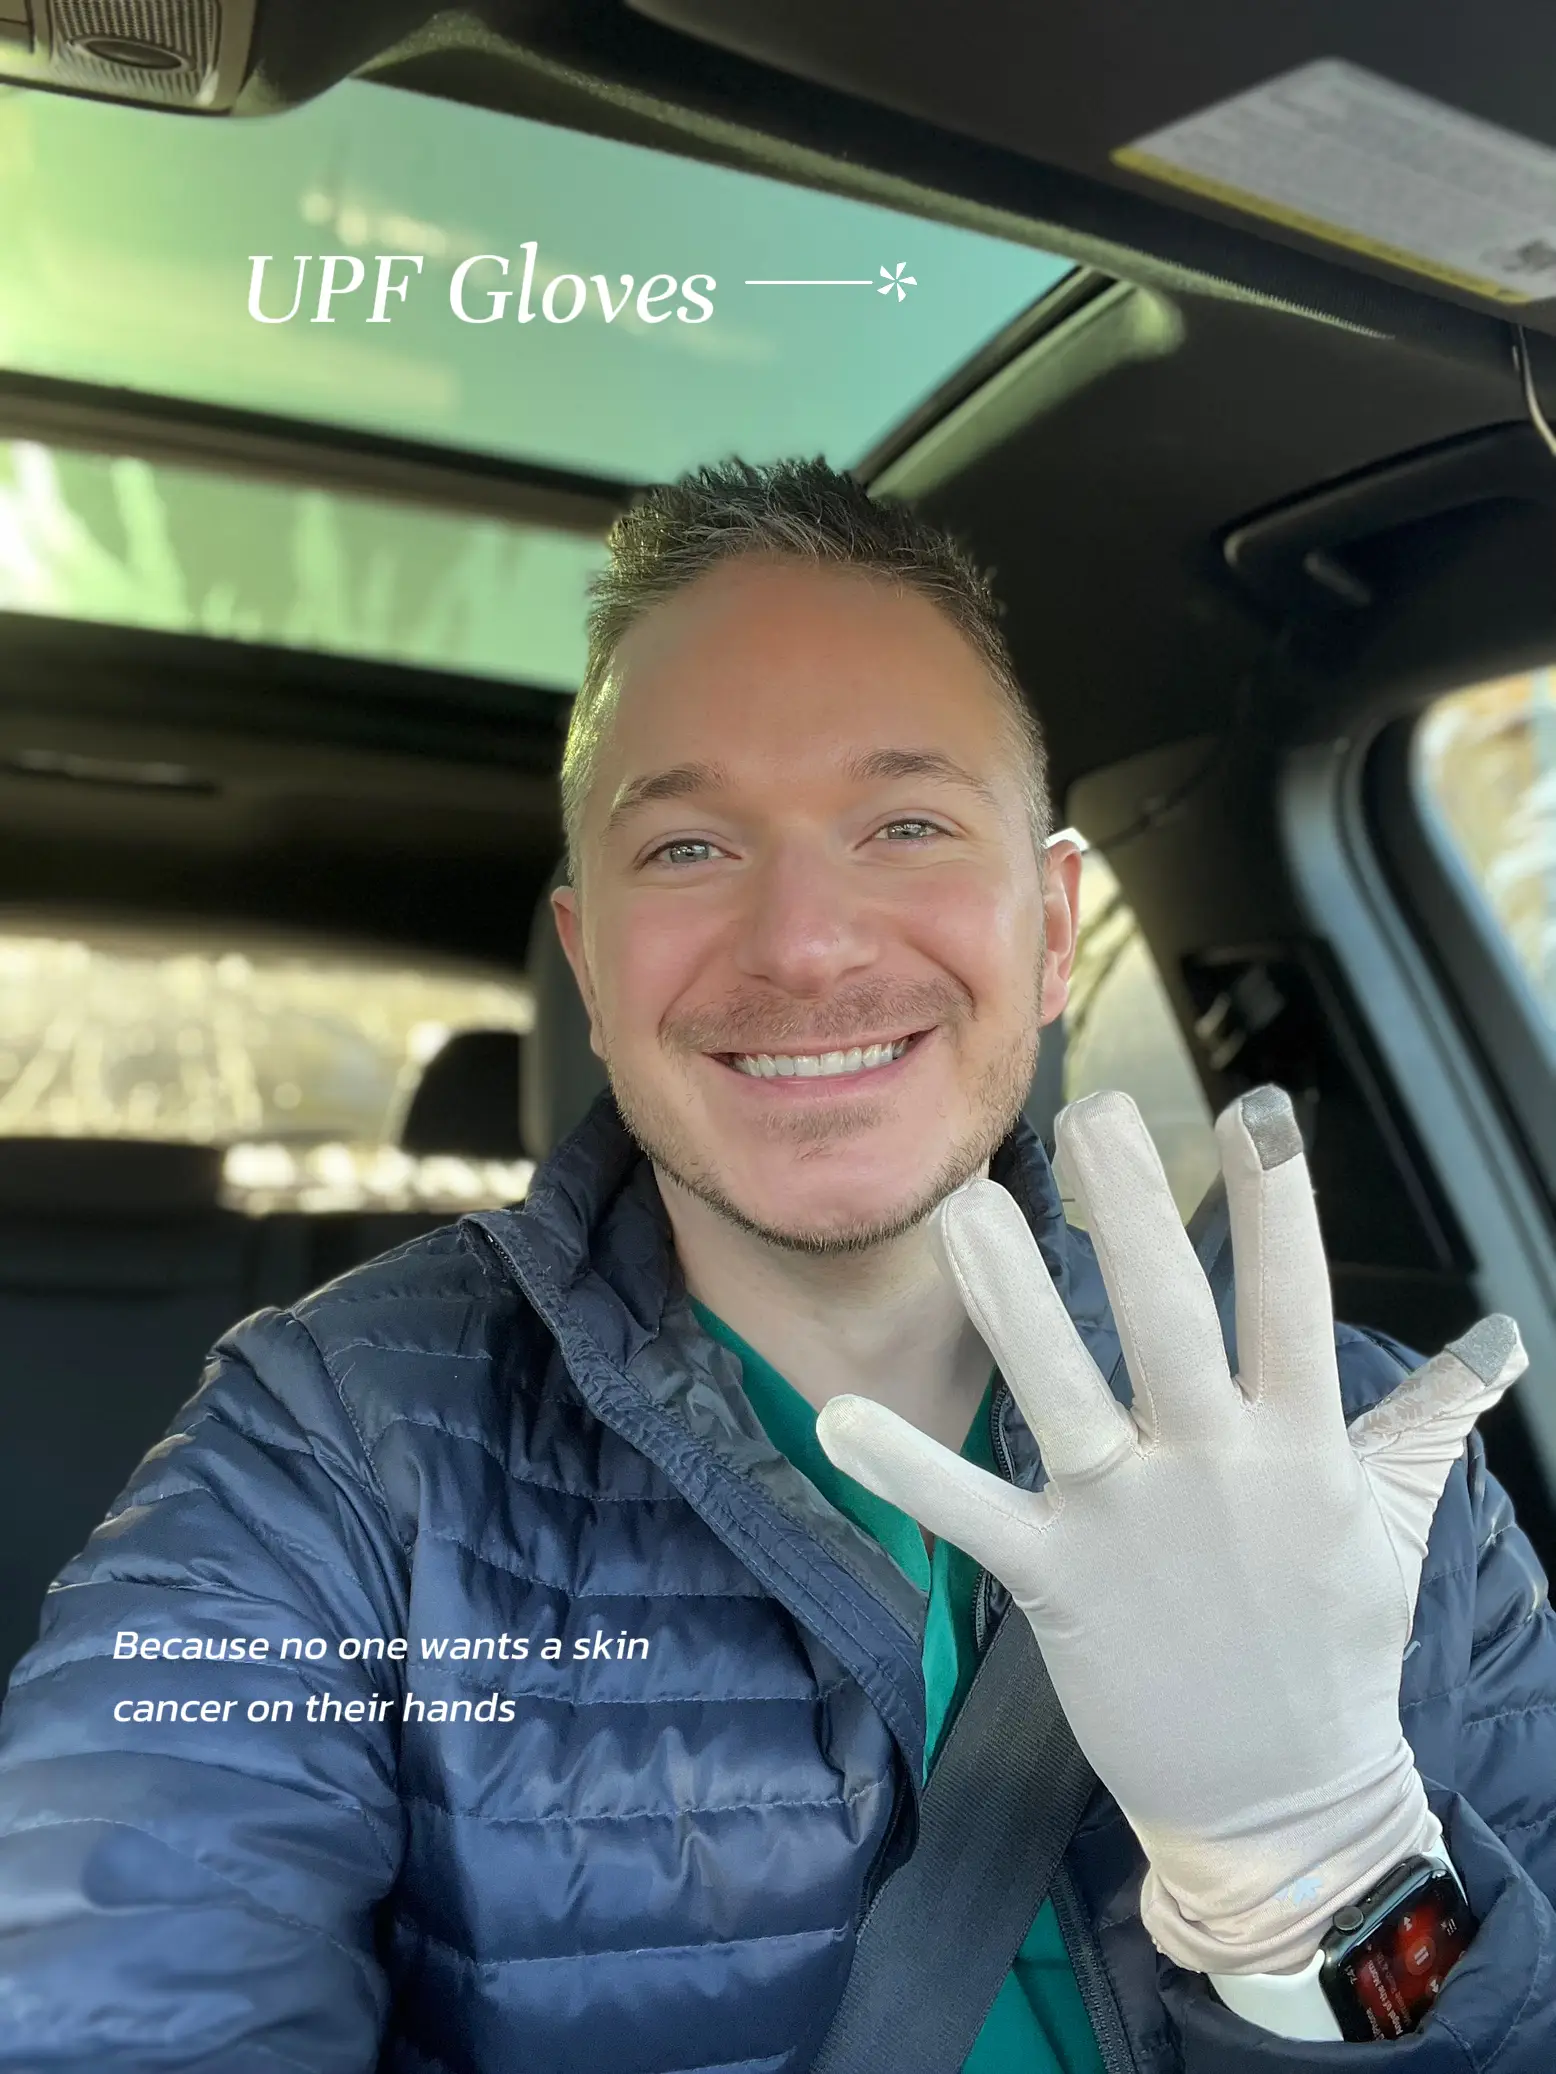 Upf Gloves with Grip - Lemon8 Search